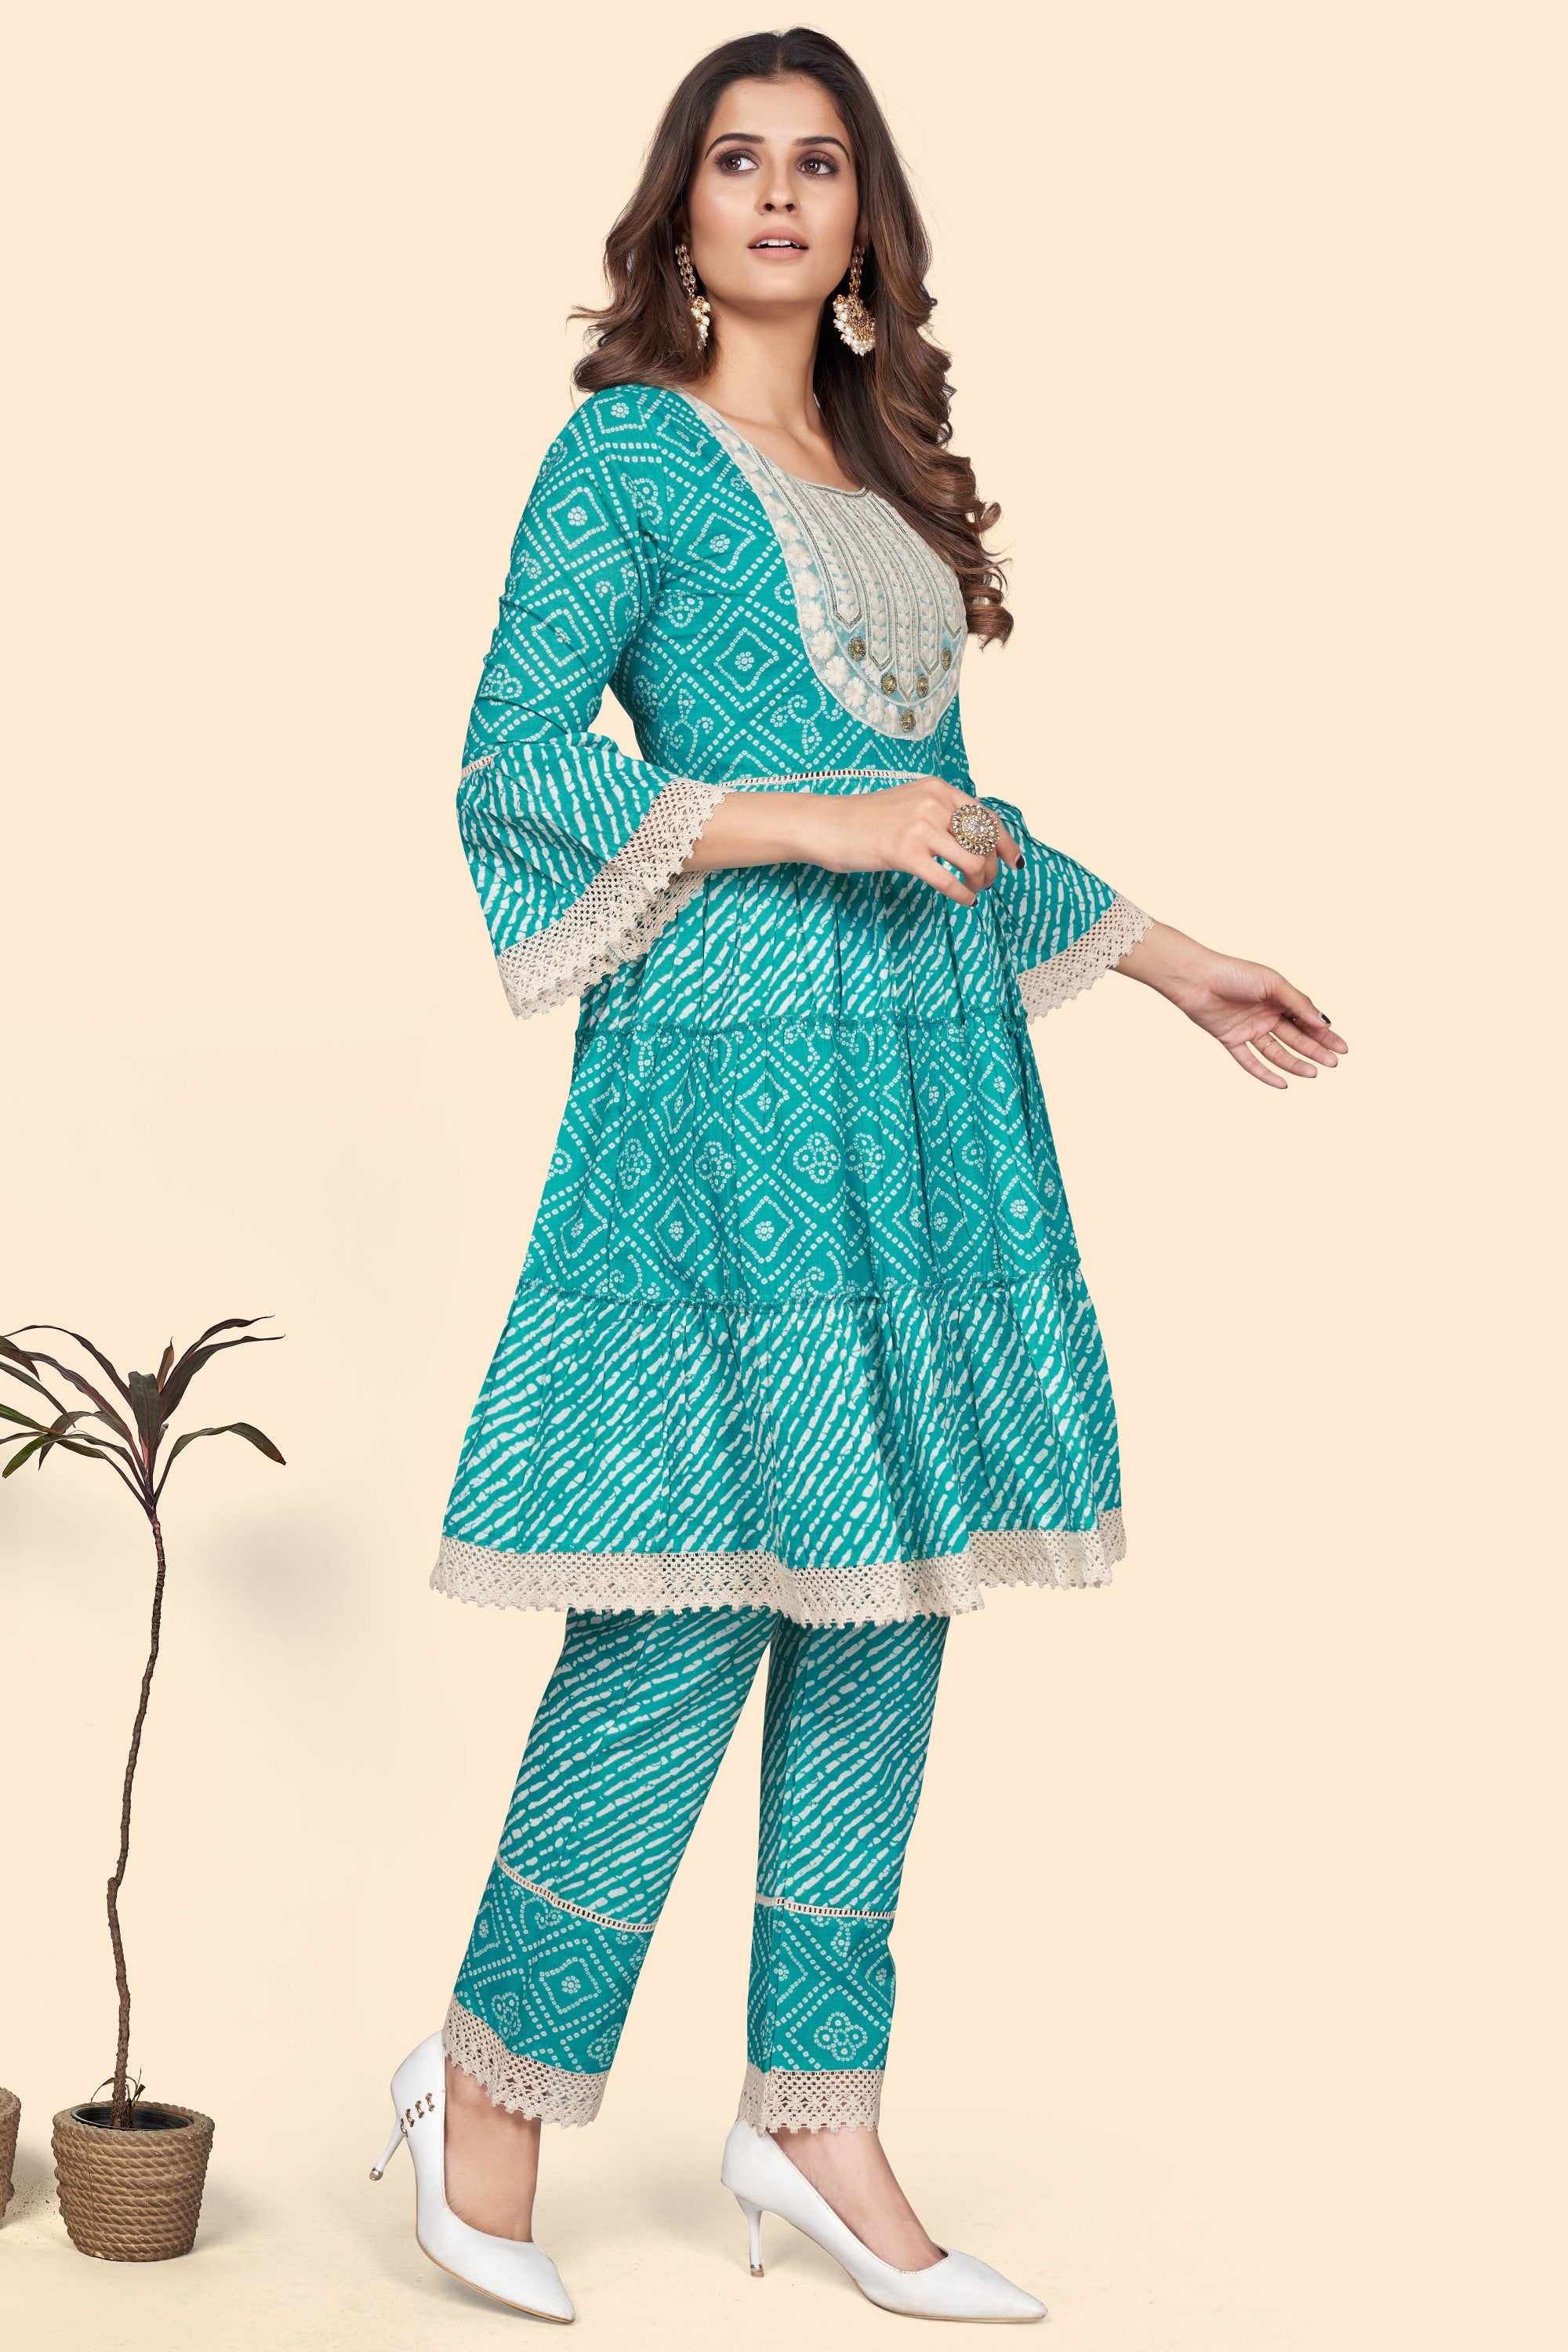 Women's Bandhani Print & Embroidered Flared Cotton Sky Blue Stitched Top With Pant - Vbuyz